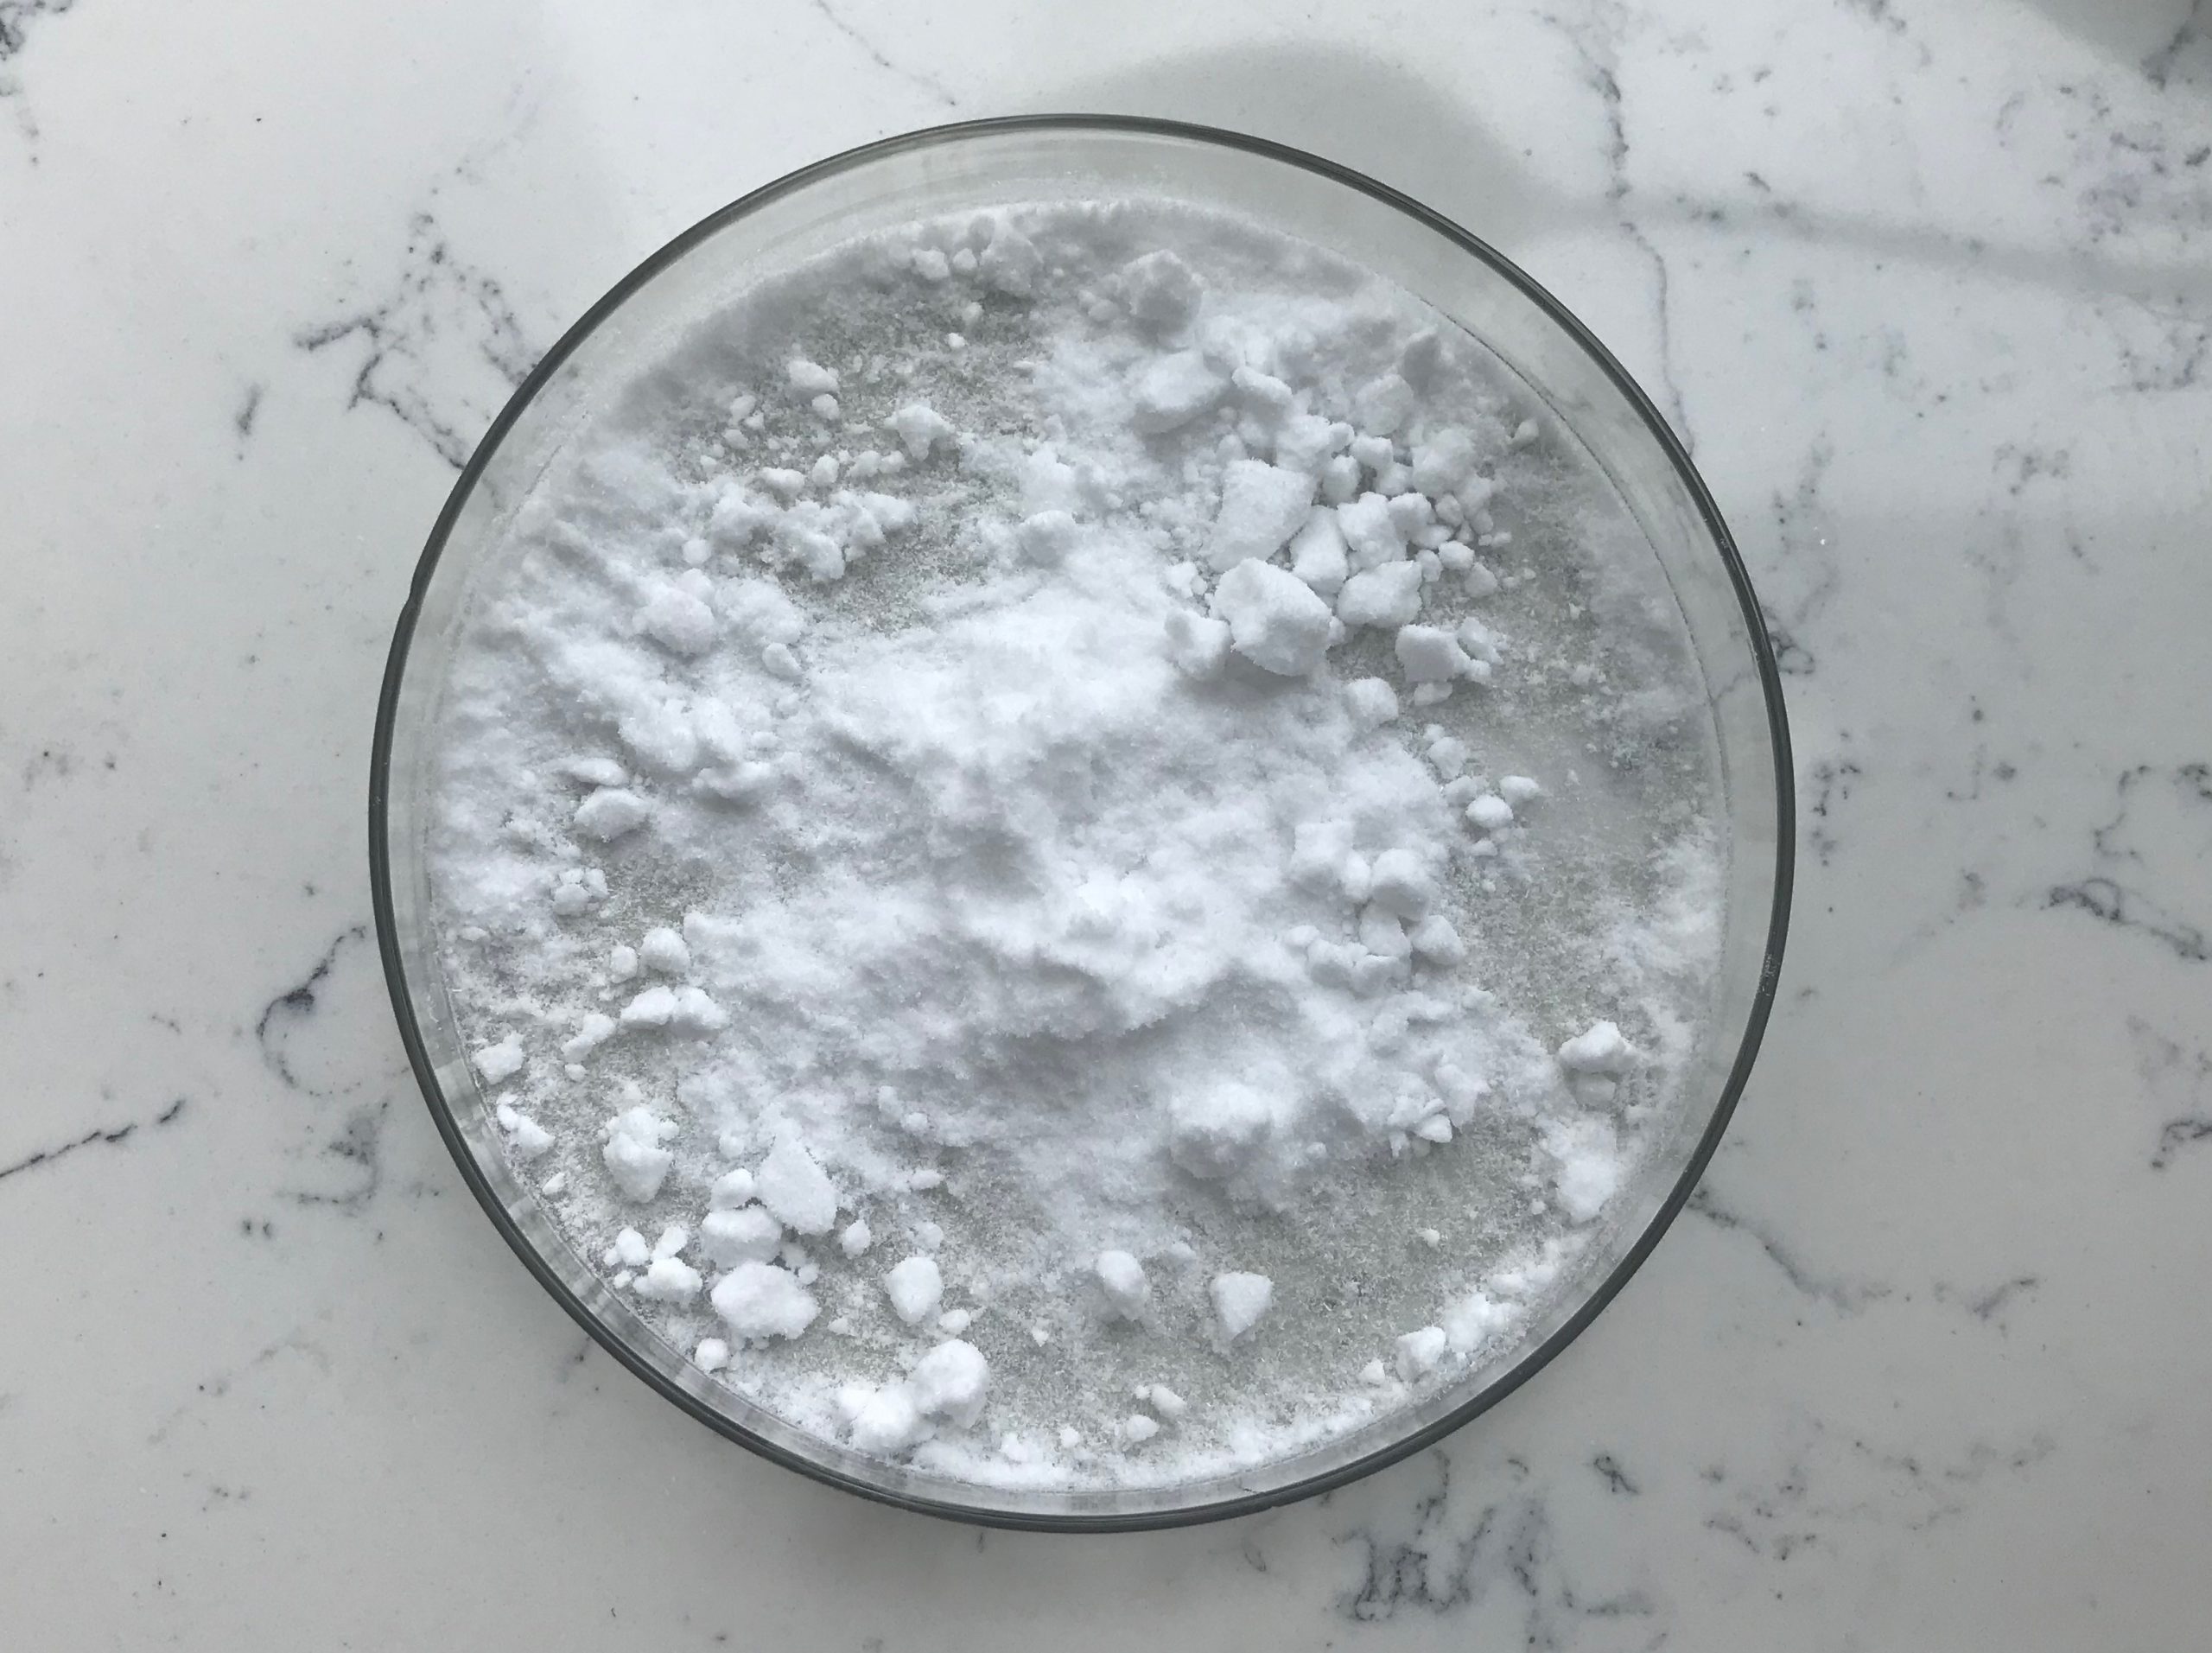 Materials and methods of WS-23-Xi'an Lyphar Biotech Co., Ltd